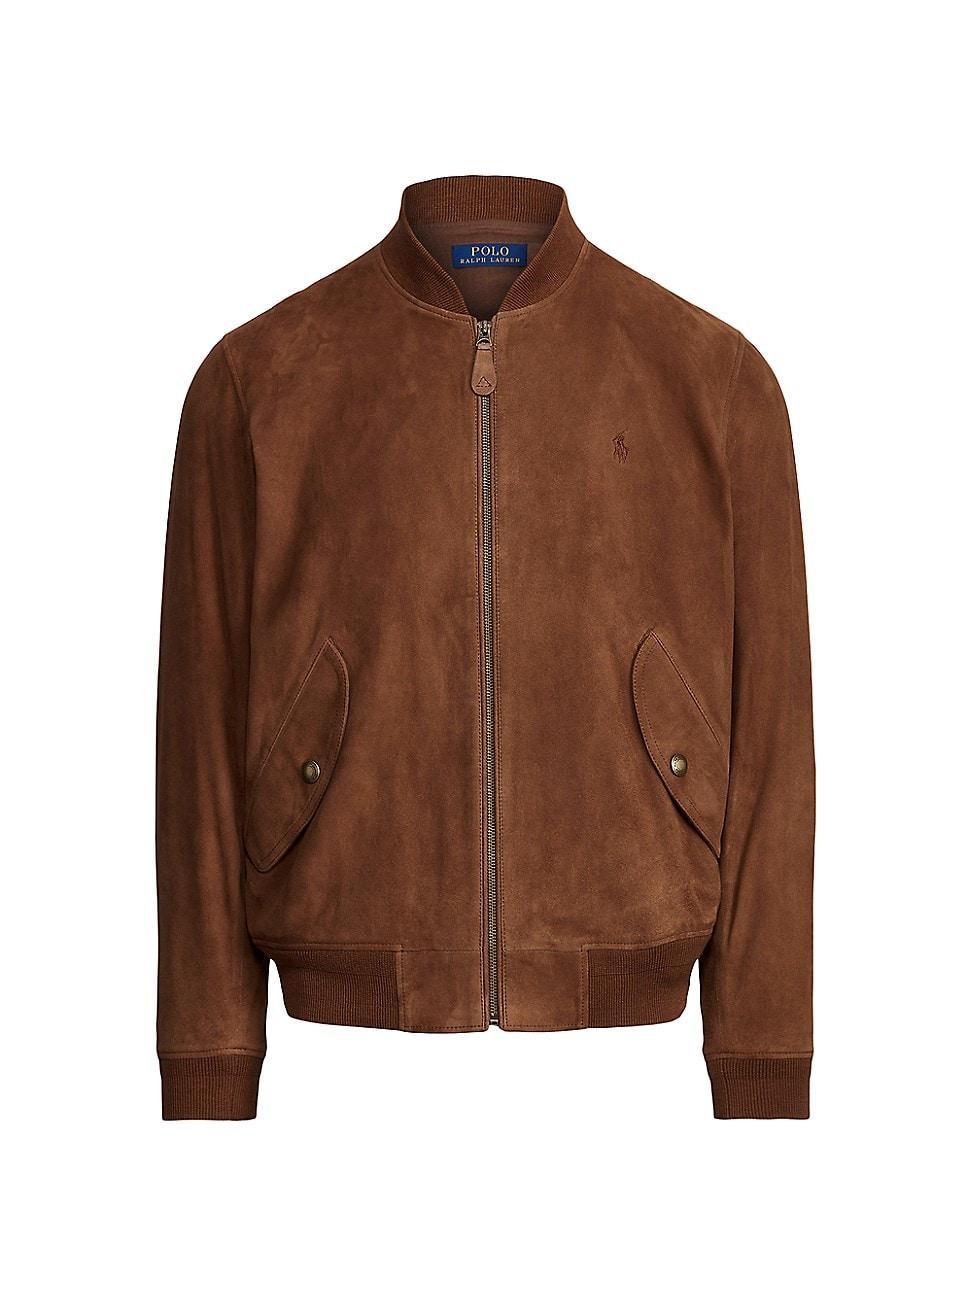 Polo Ralph Lauren Suede Bomber Jacket Product Image